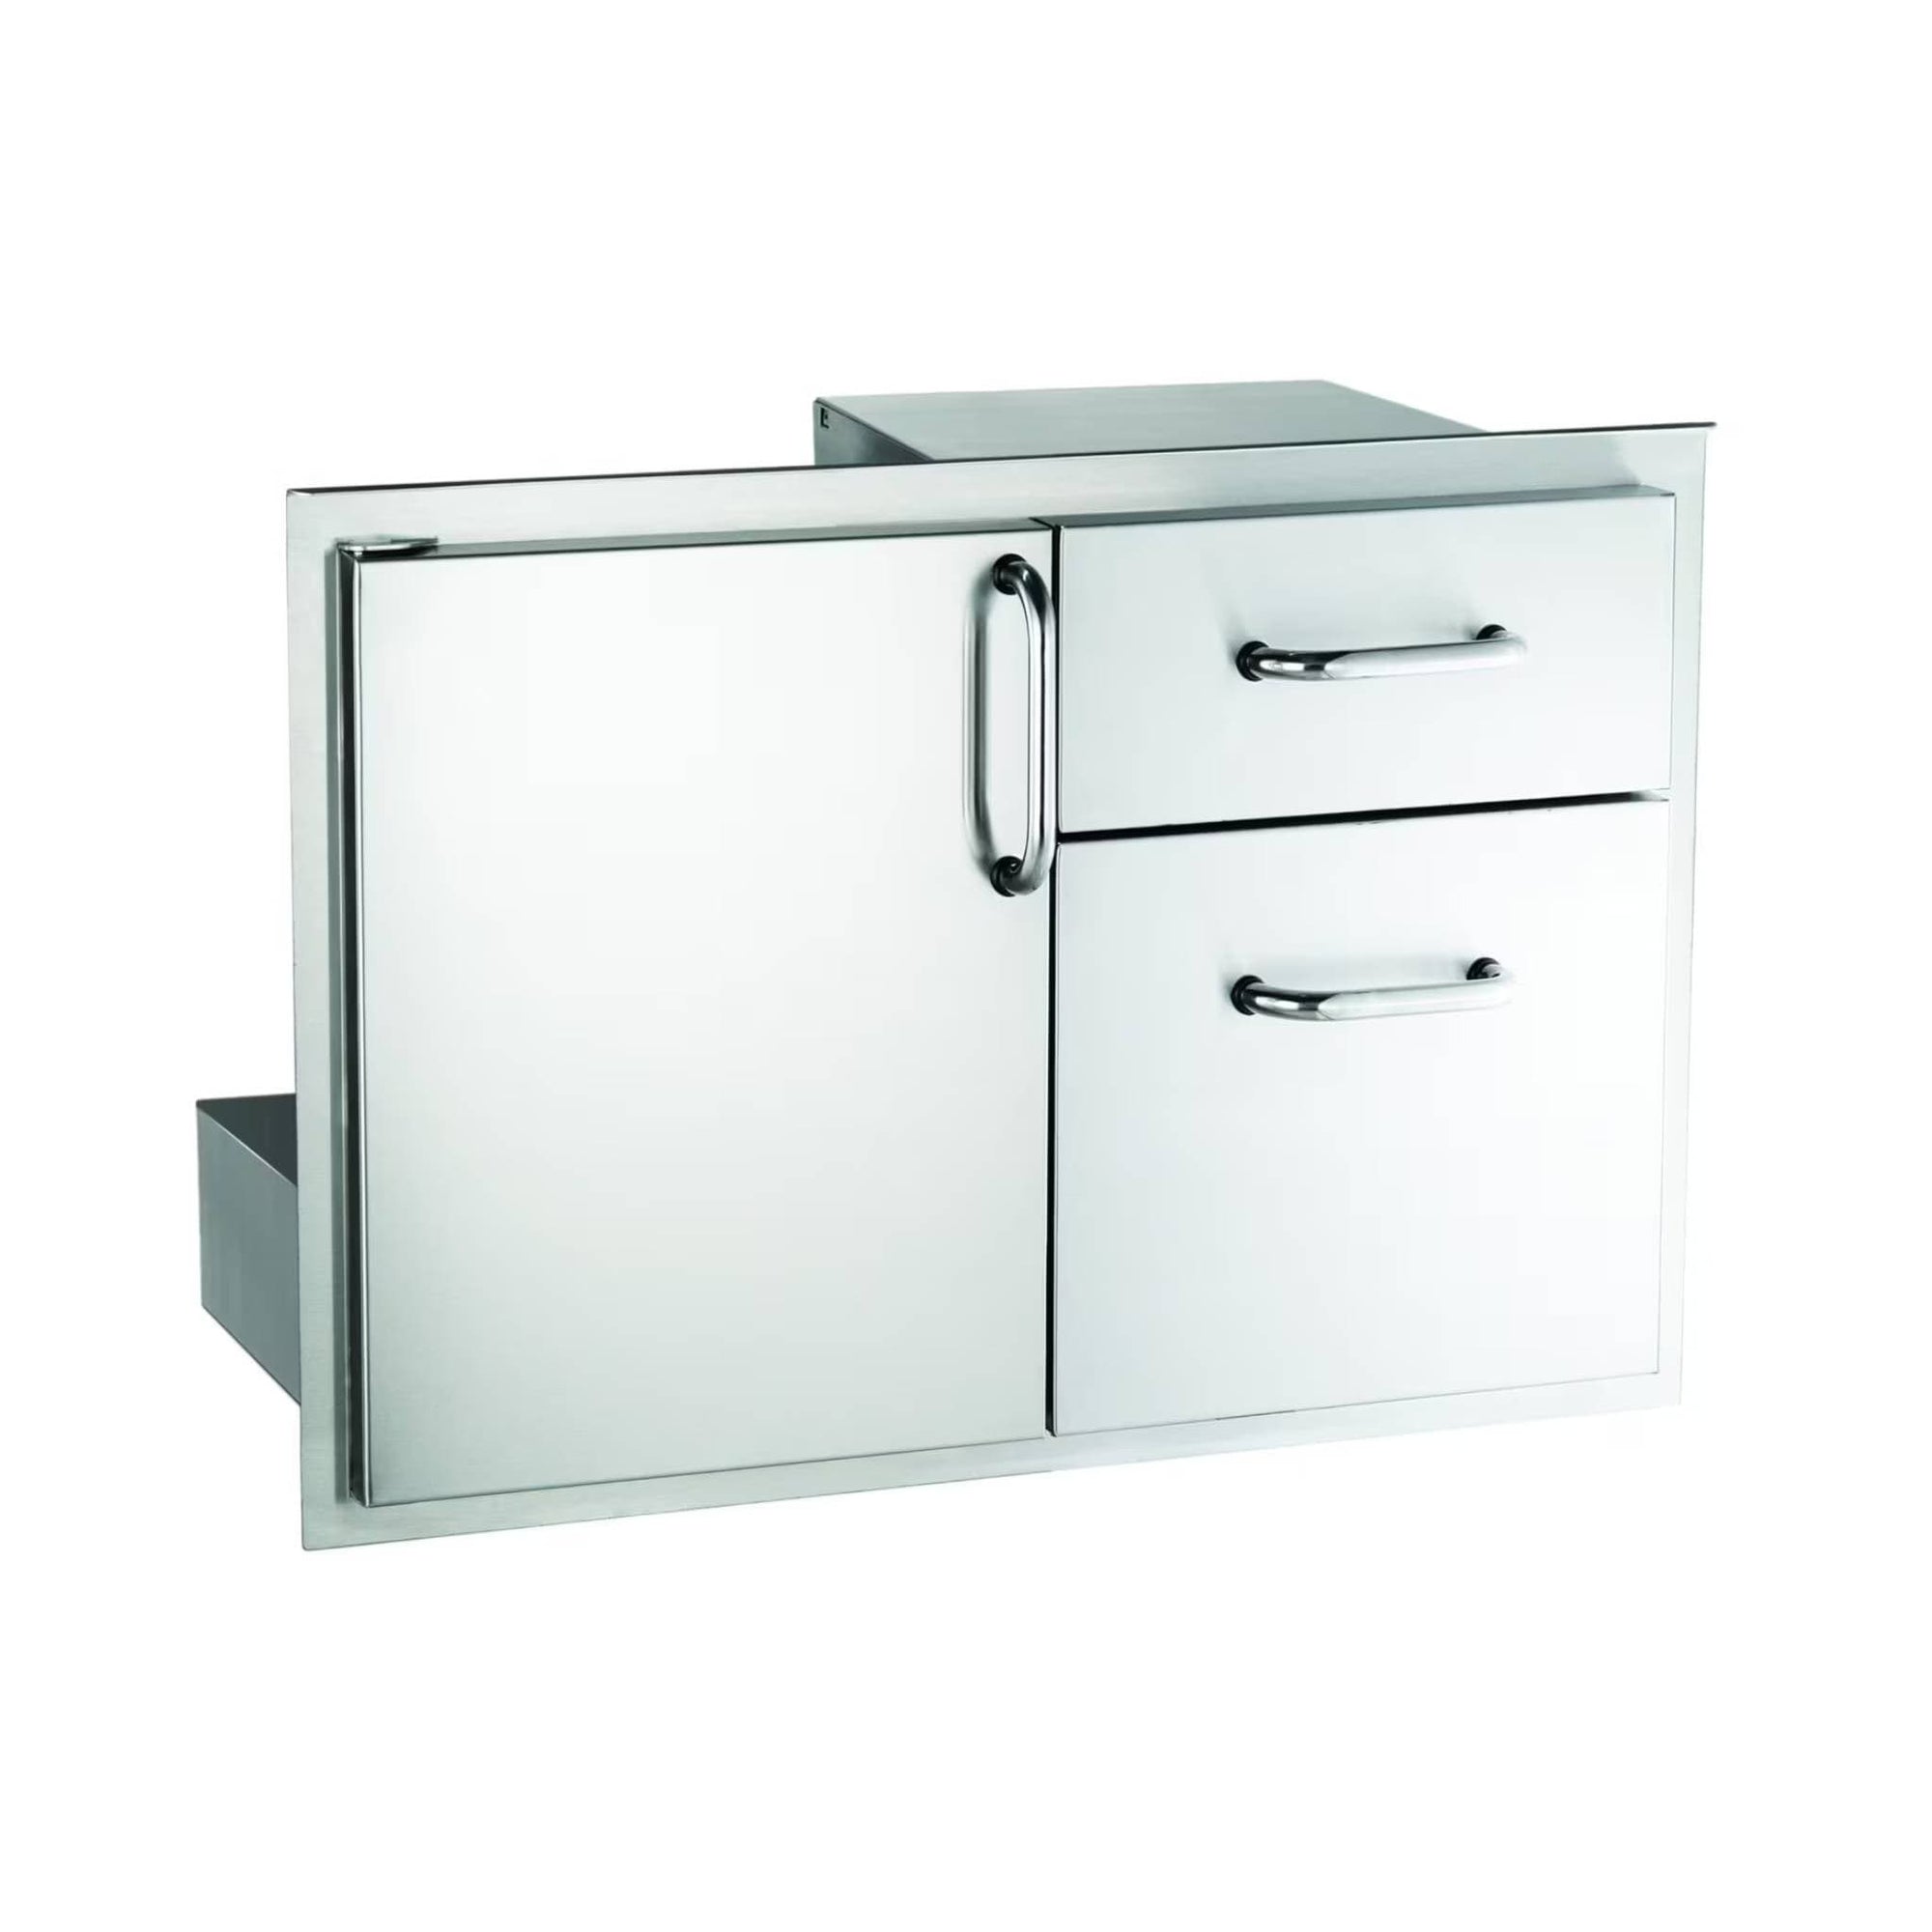 AOG 30" Access Door & Double Drawer Combo - Culinary Hardware